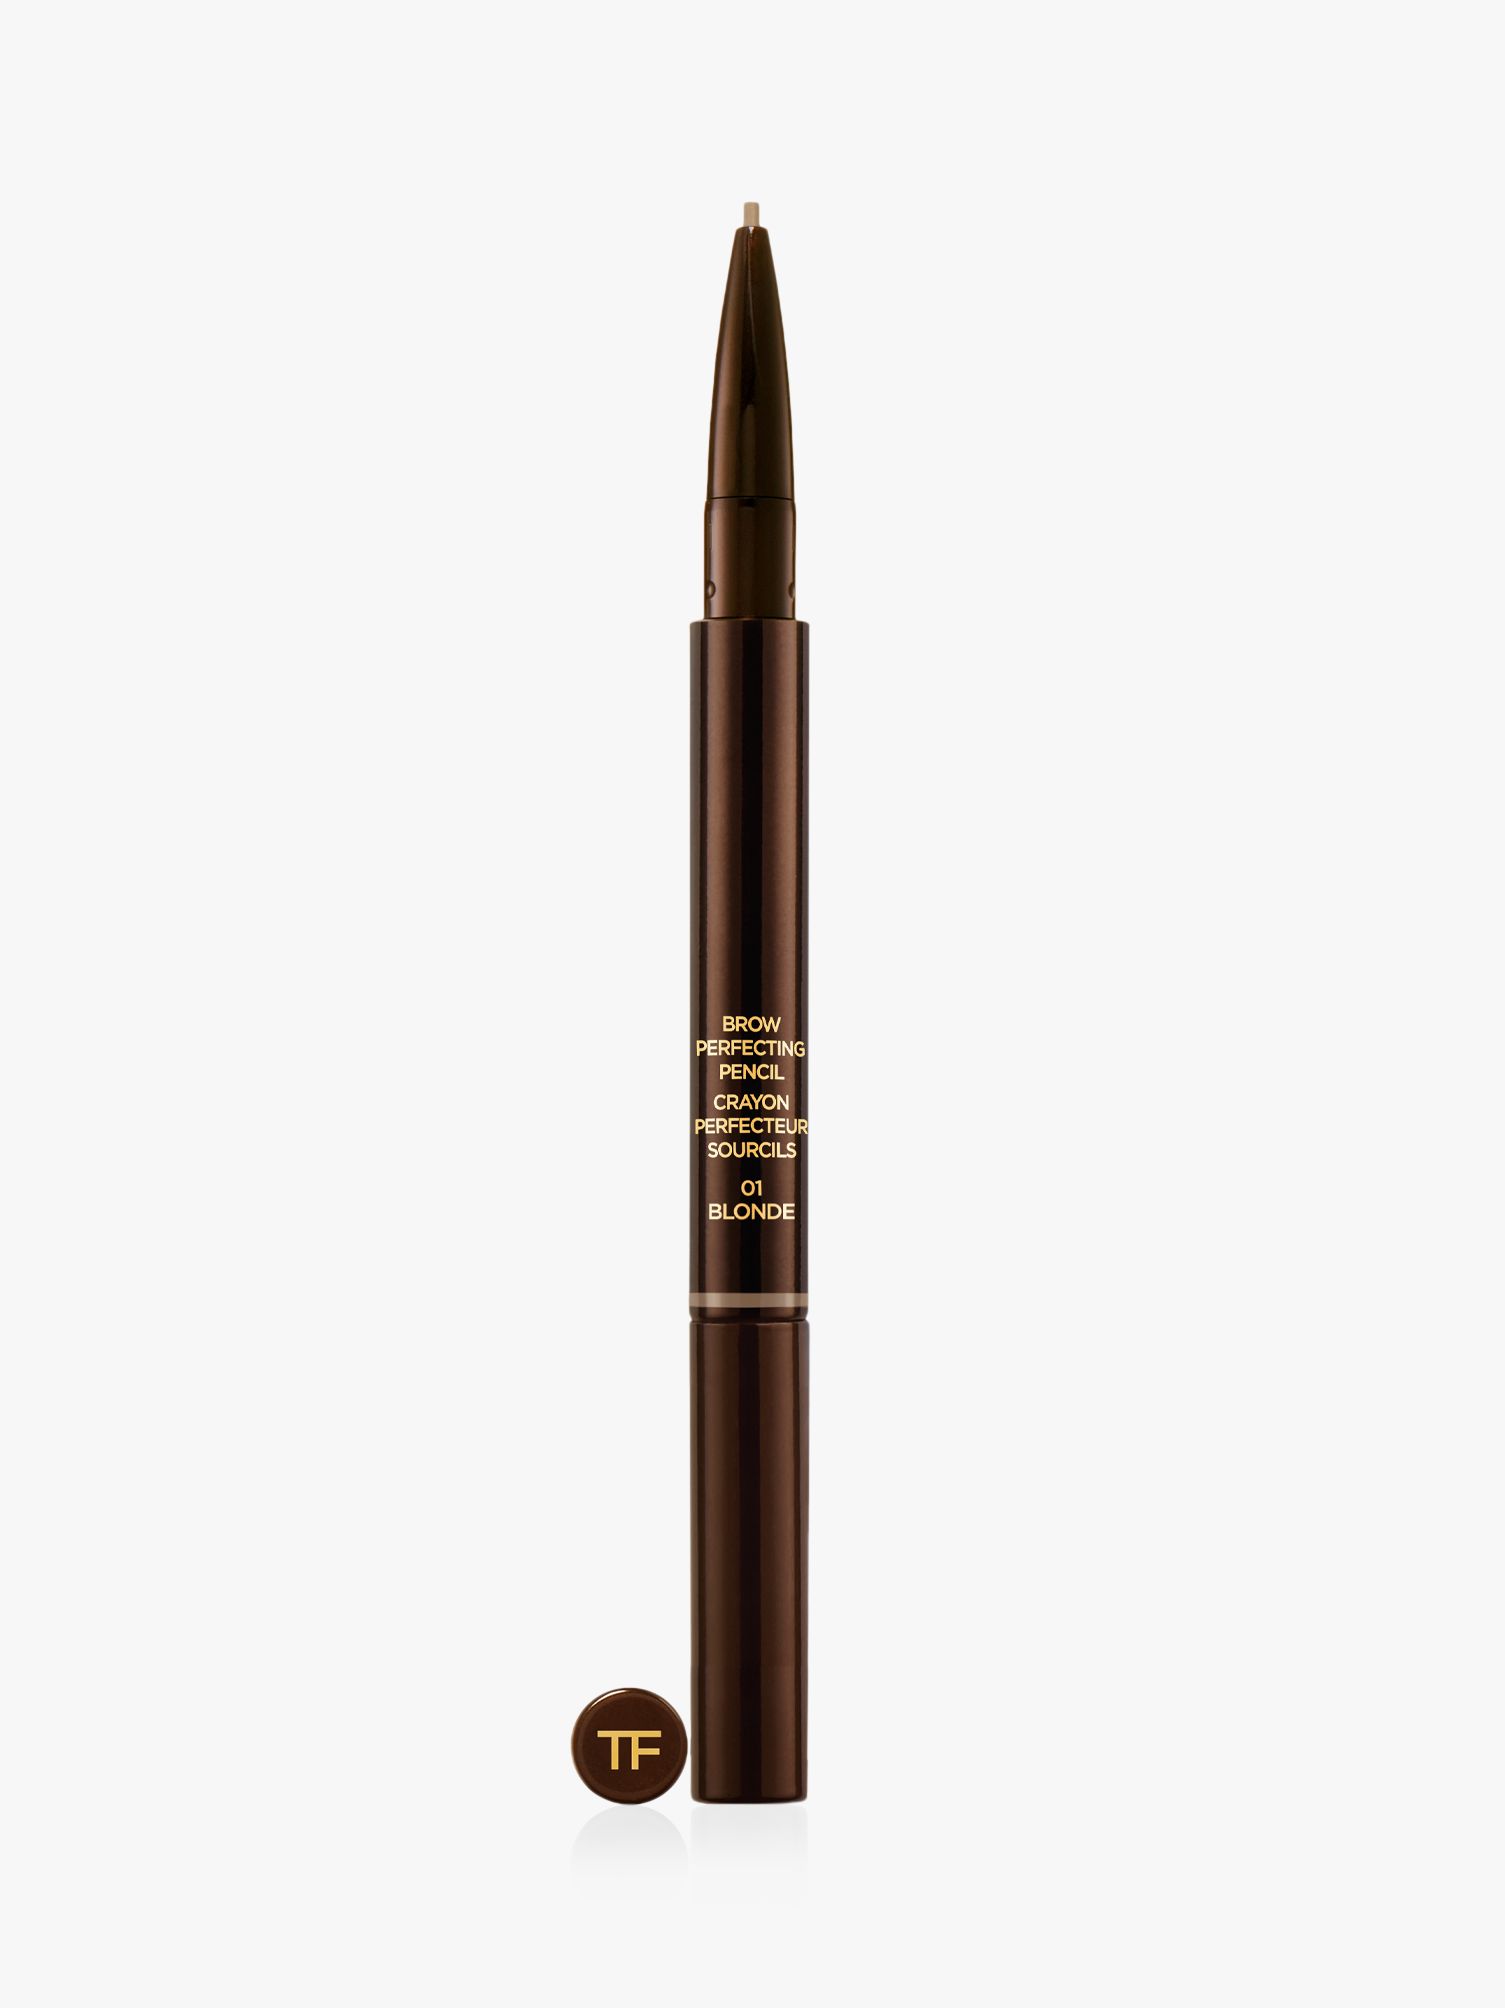 TOM FORD Brow Perfecting Pencil at John Lewis & Partners